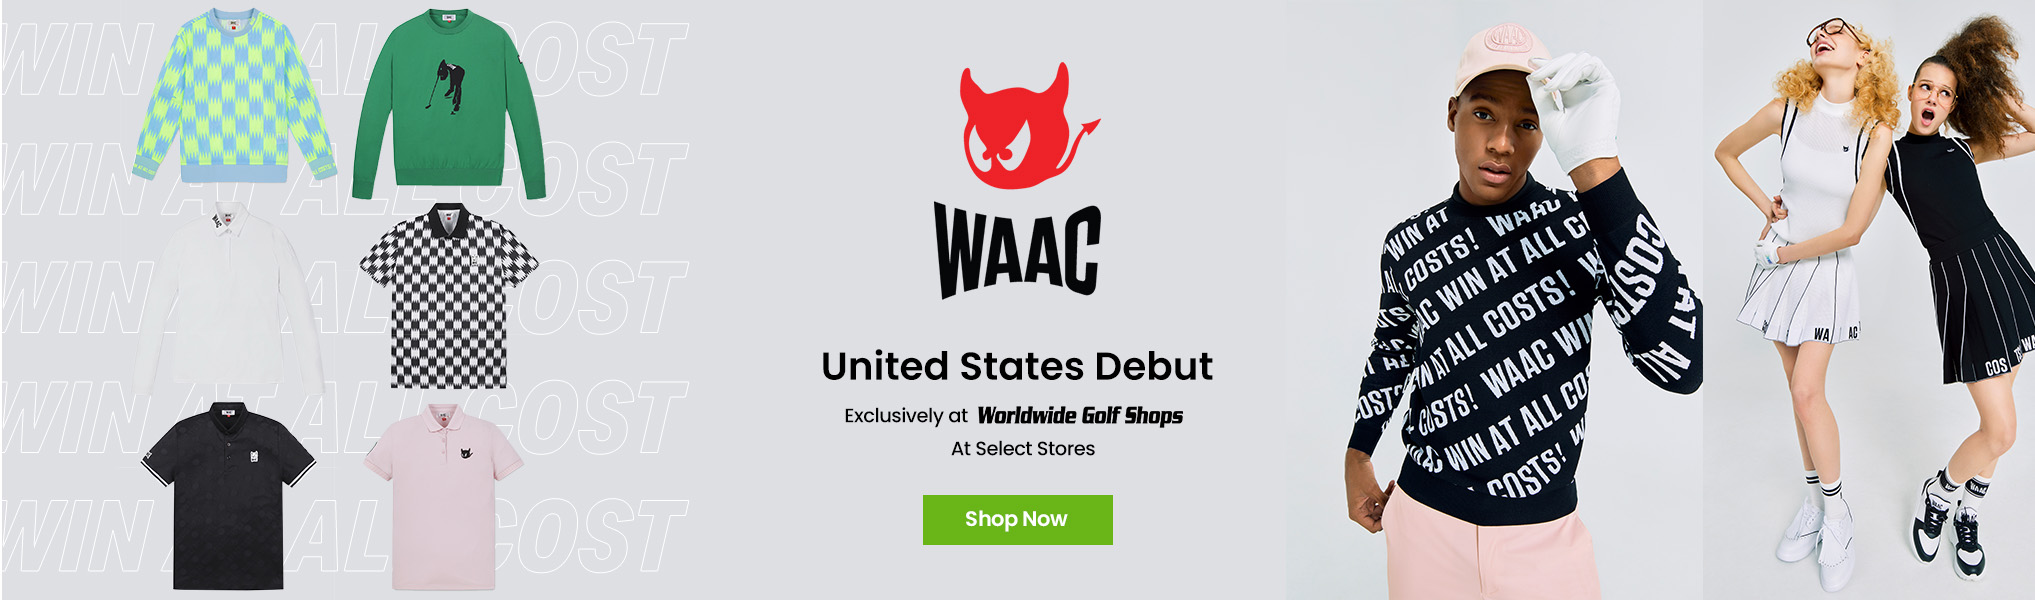 WAAC apparel out not only on WWg